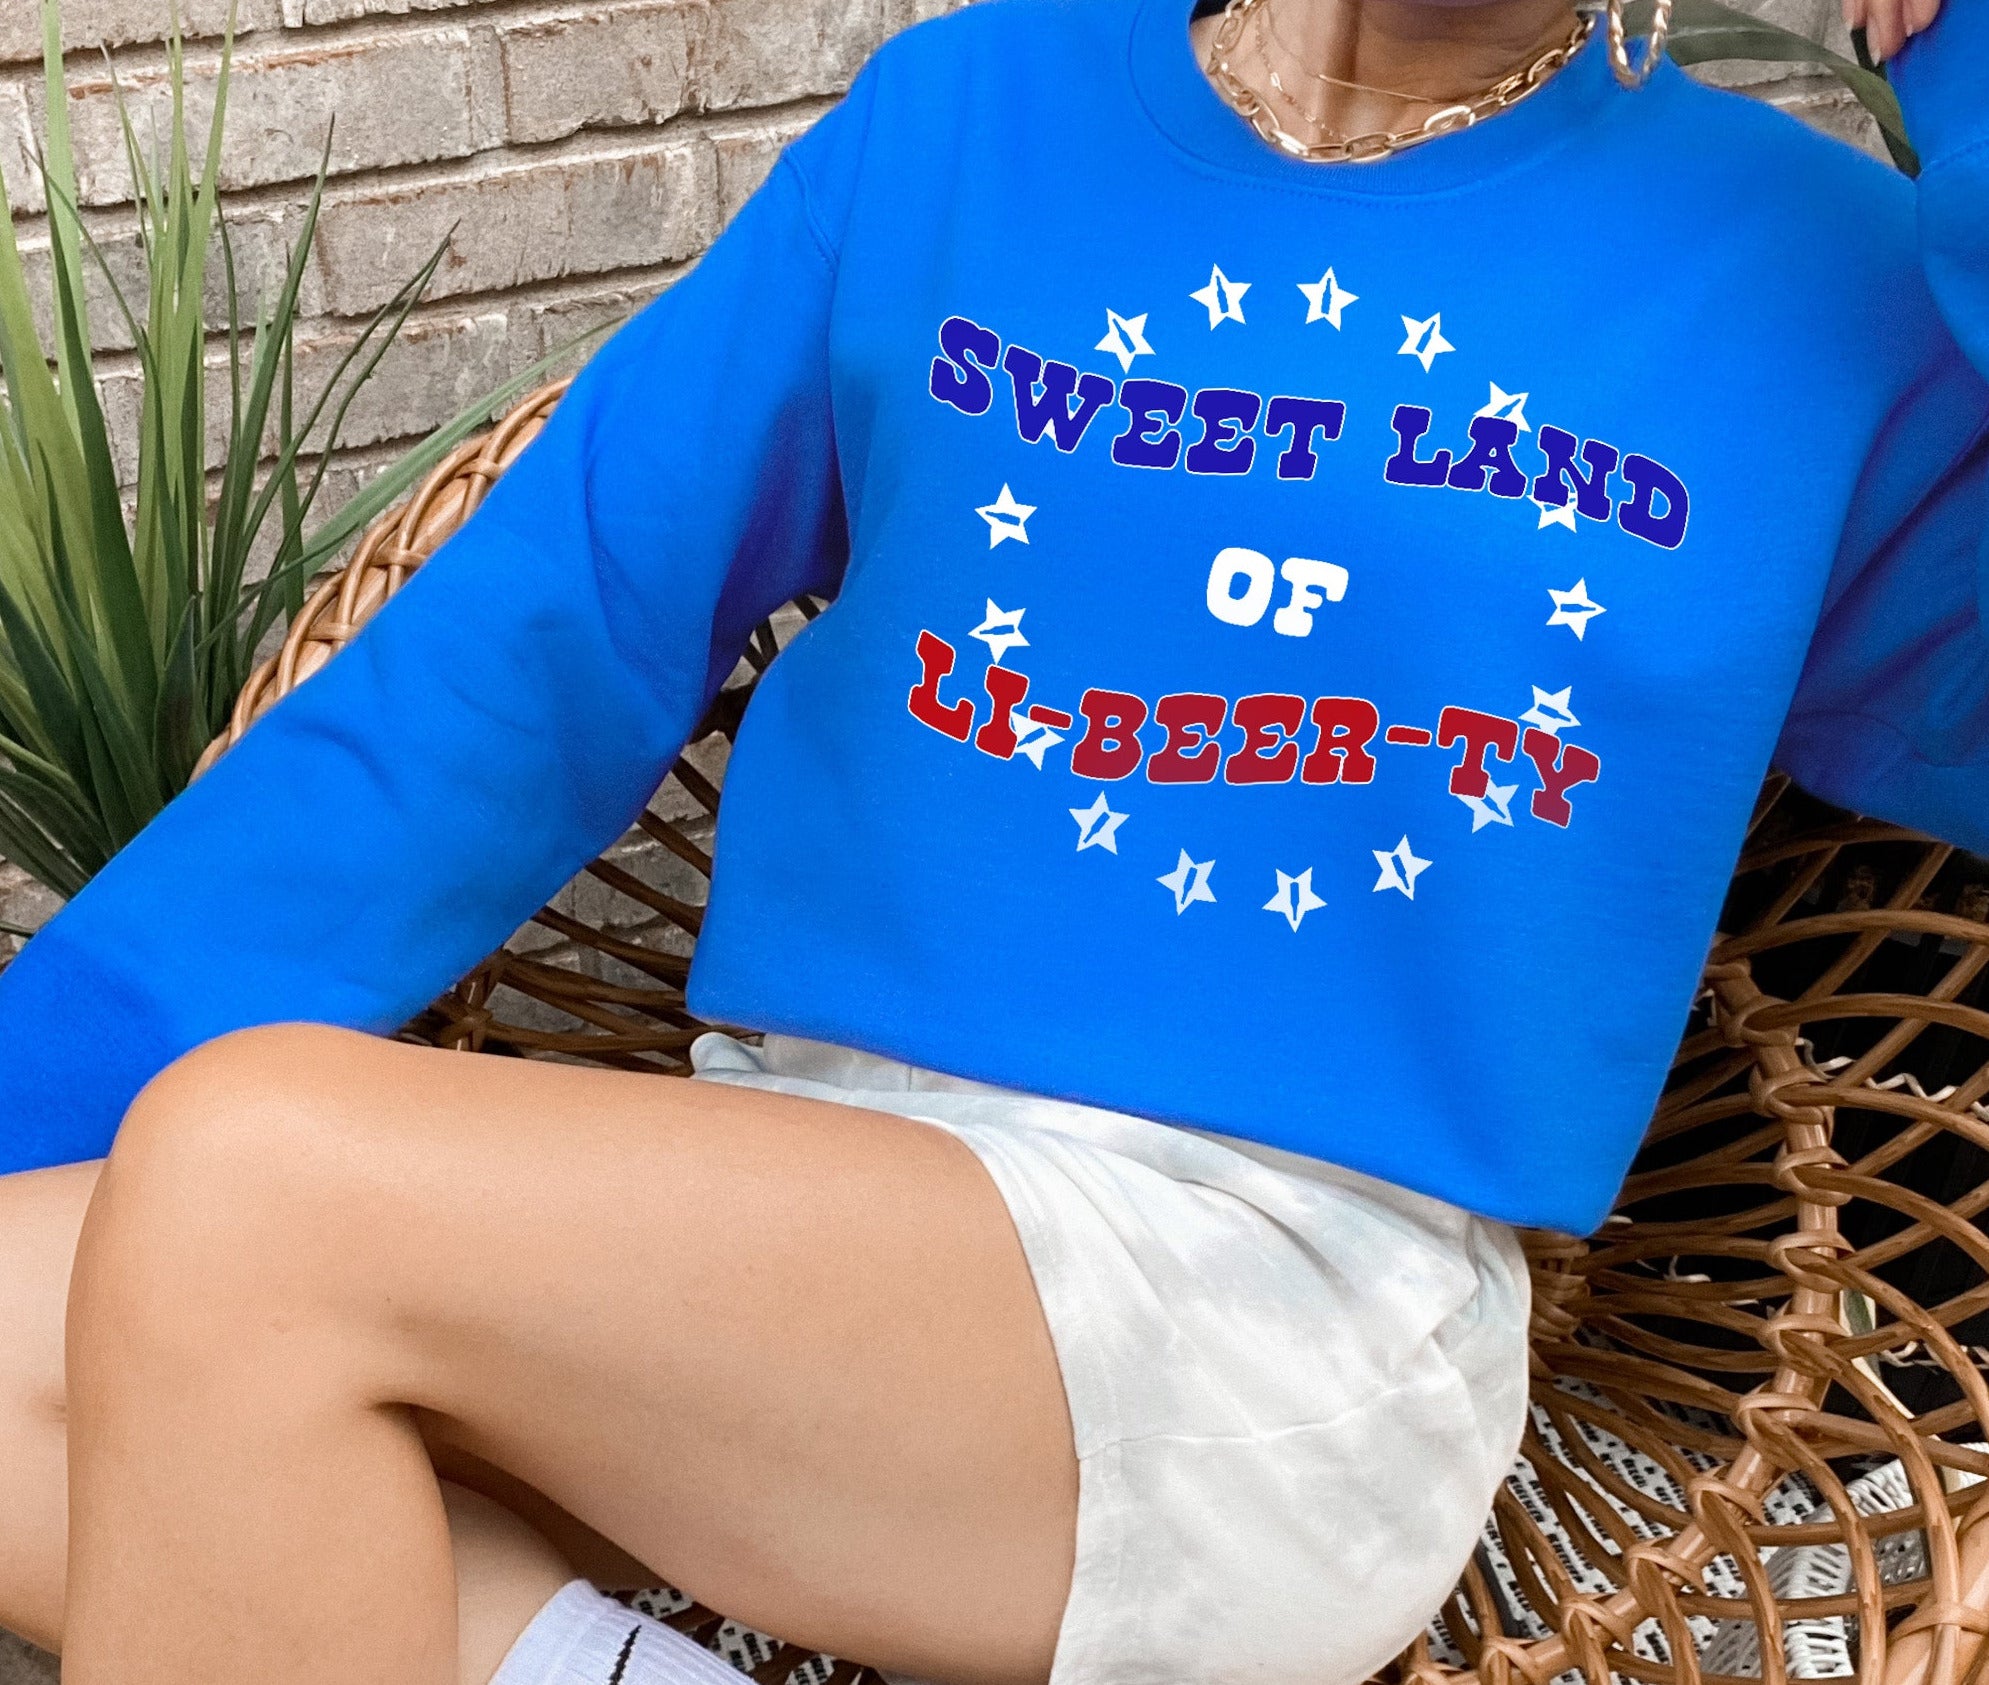 royal blue sweater that says sweet land of li-beer-ty - HighCiti